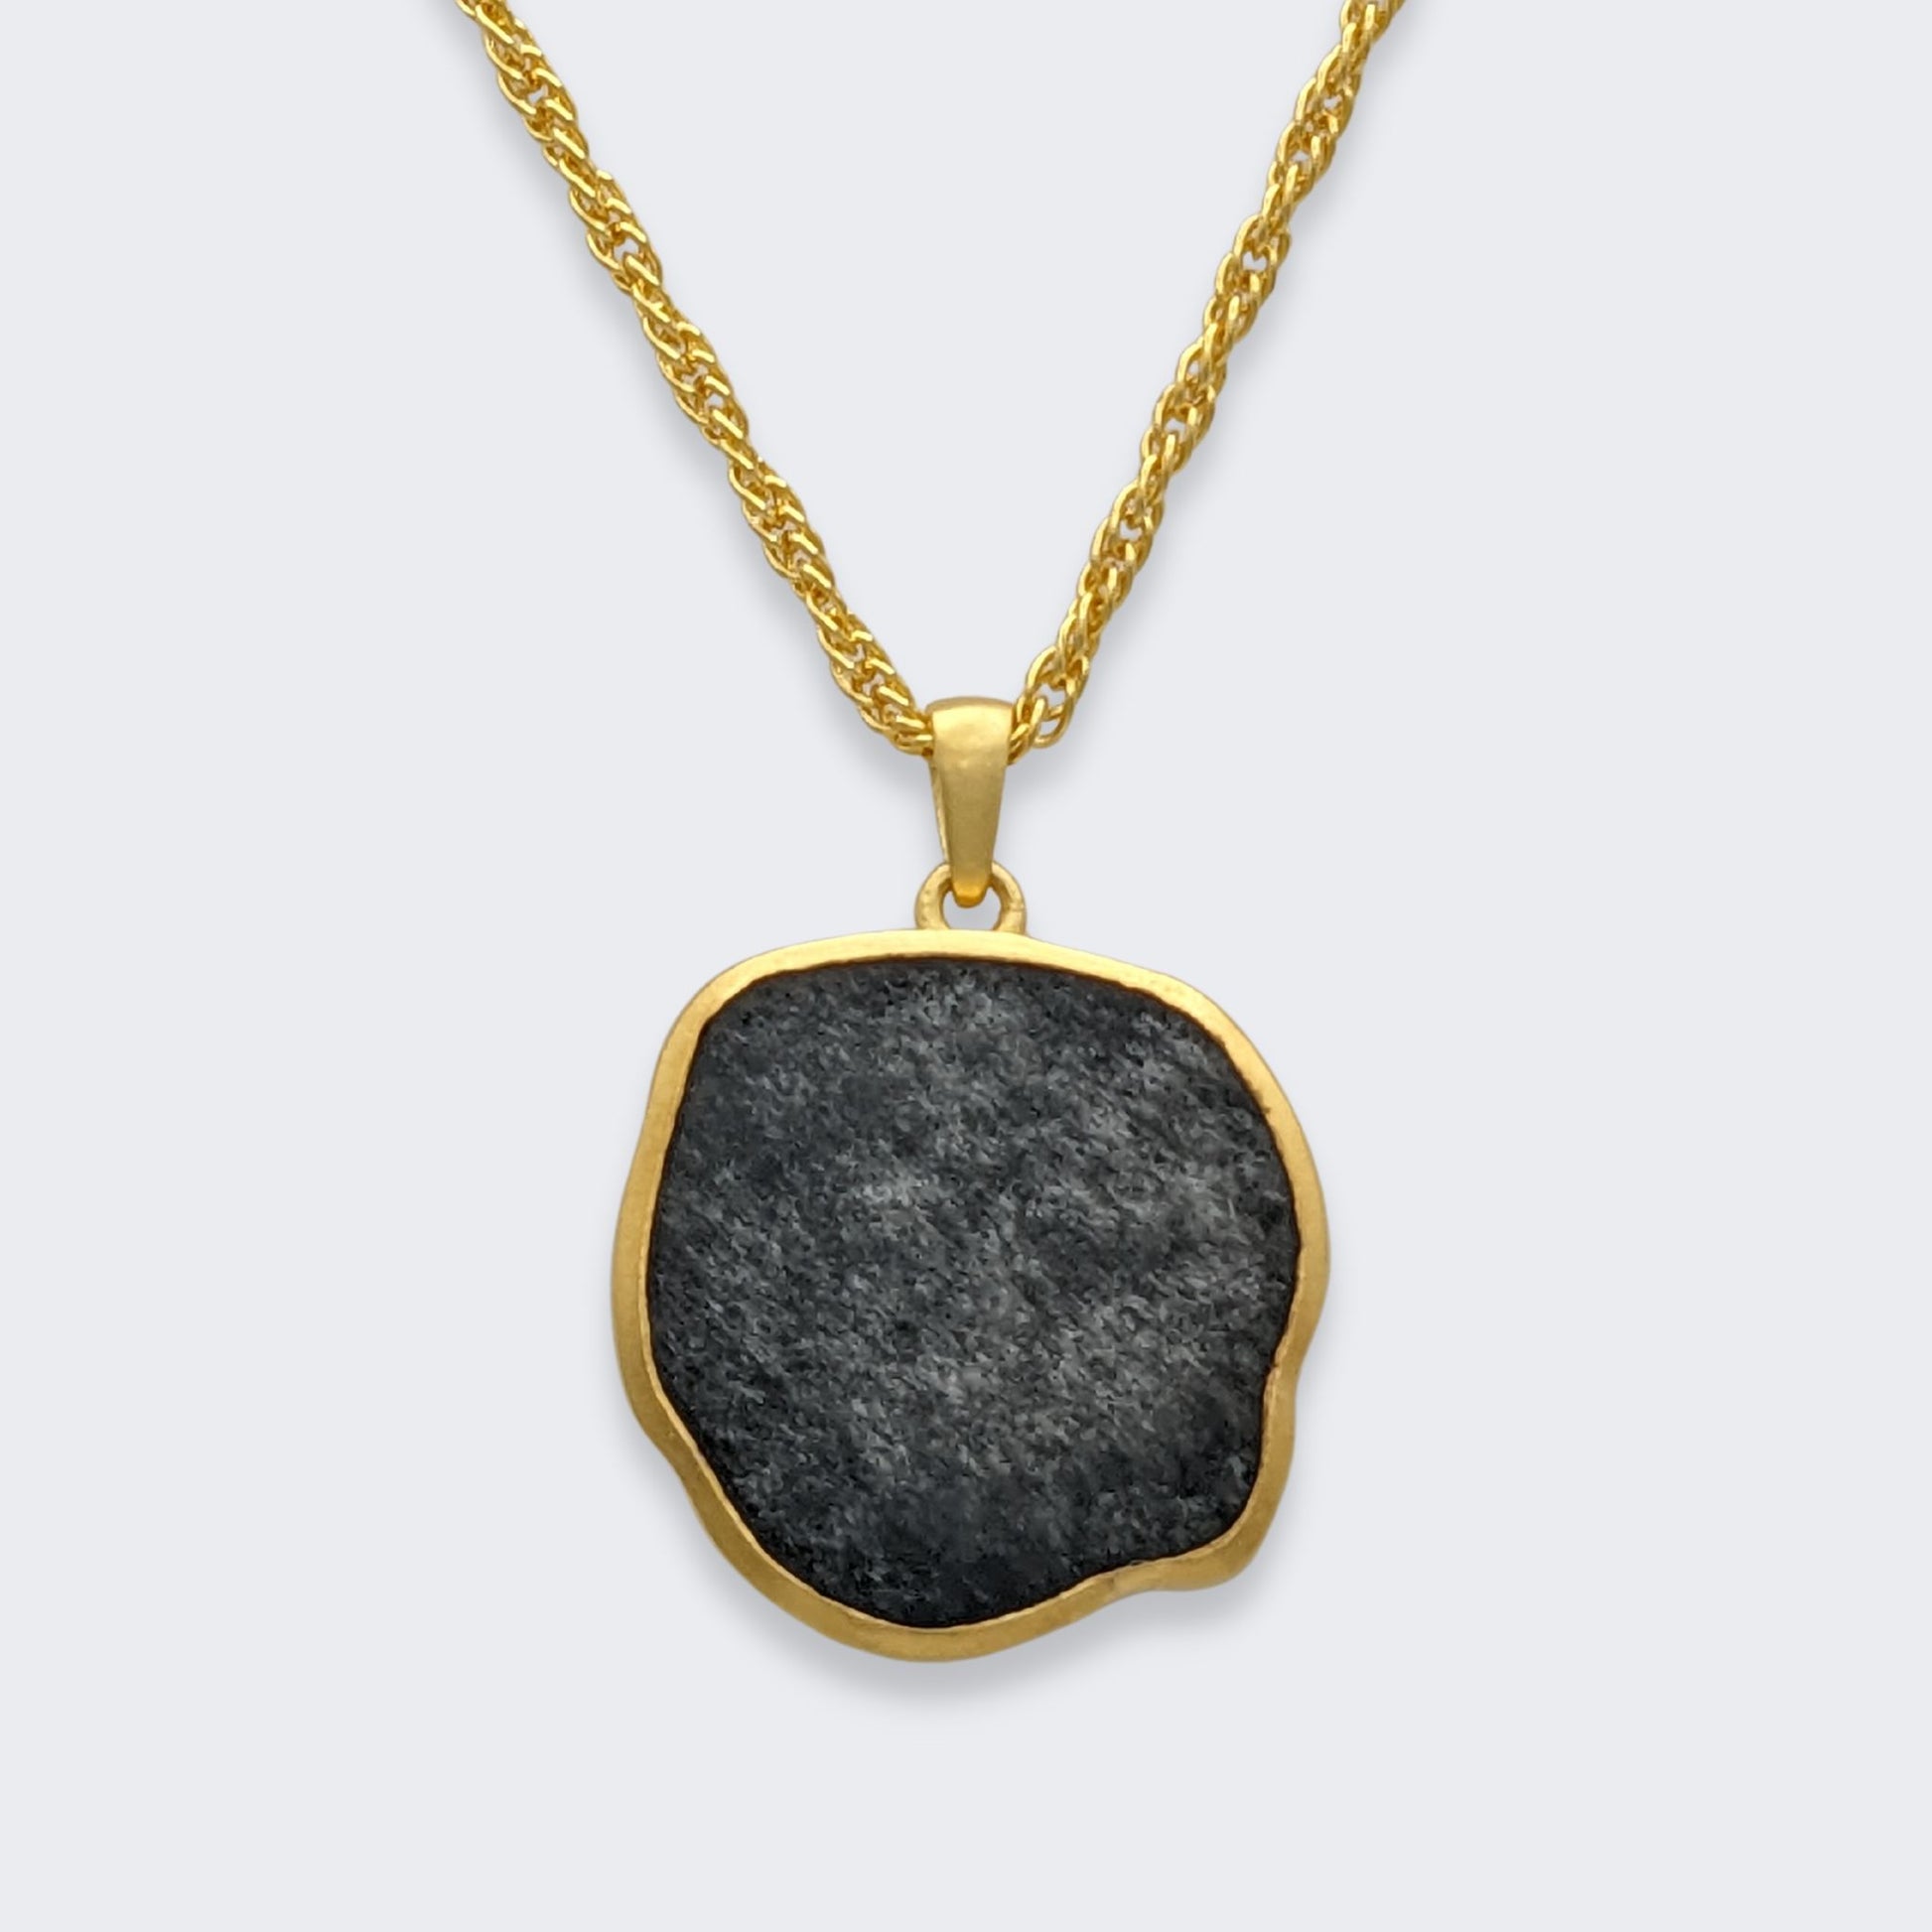 lars reversible dog coin necklace in 18k gold vermeil reversed (back view), silver sheen obsidian